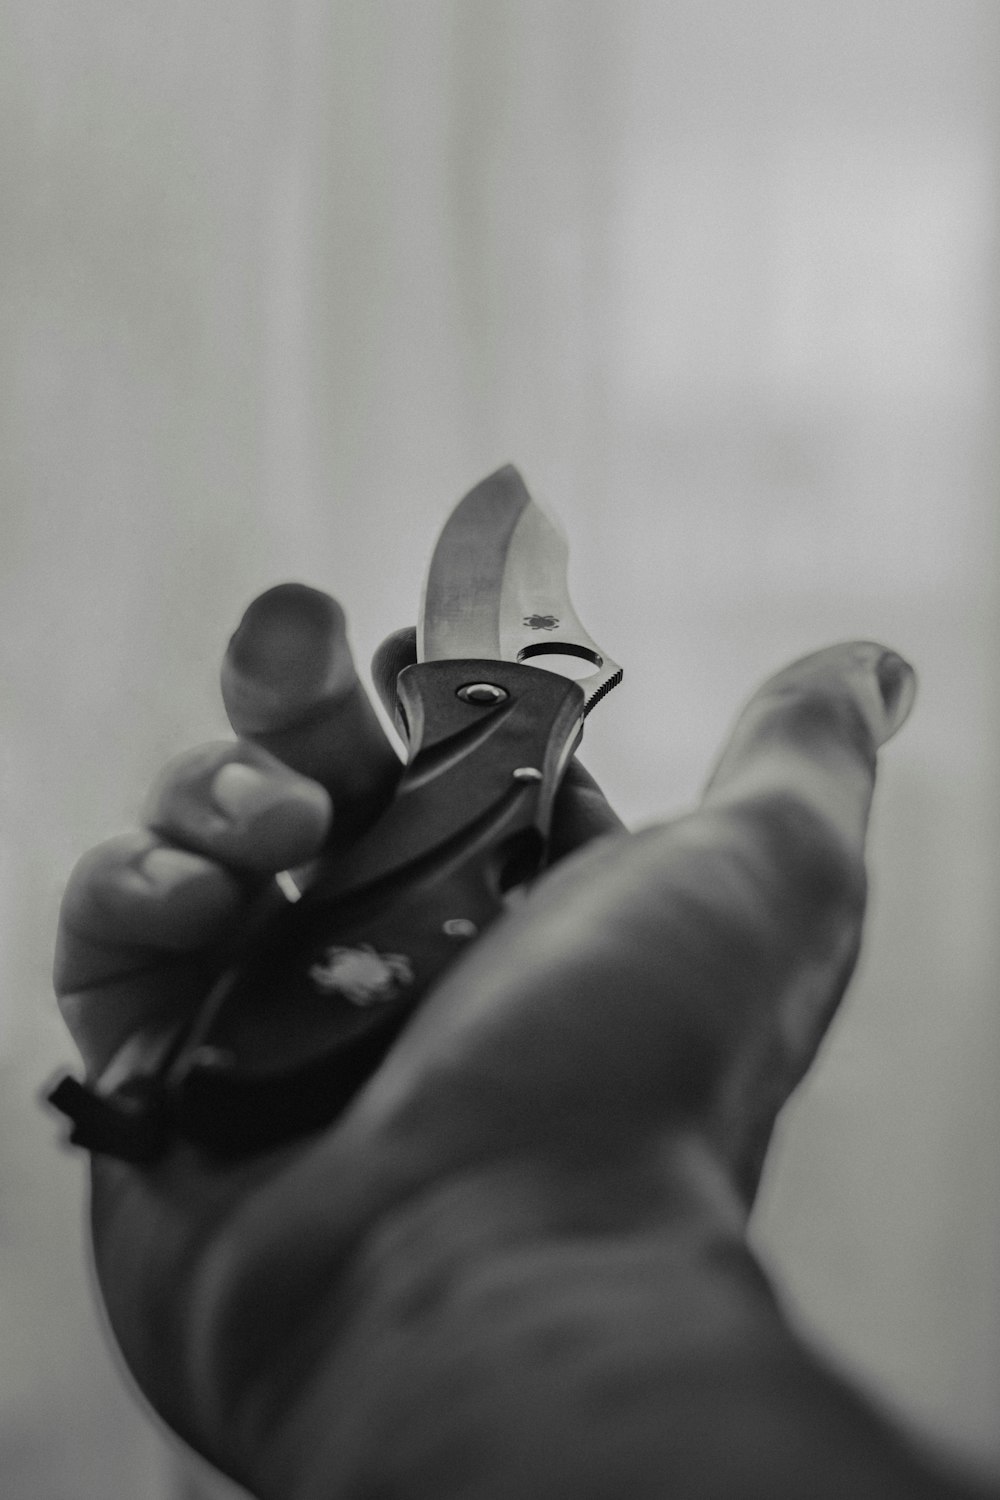 a person holding a pair of scissors in their hand